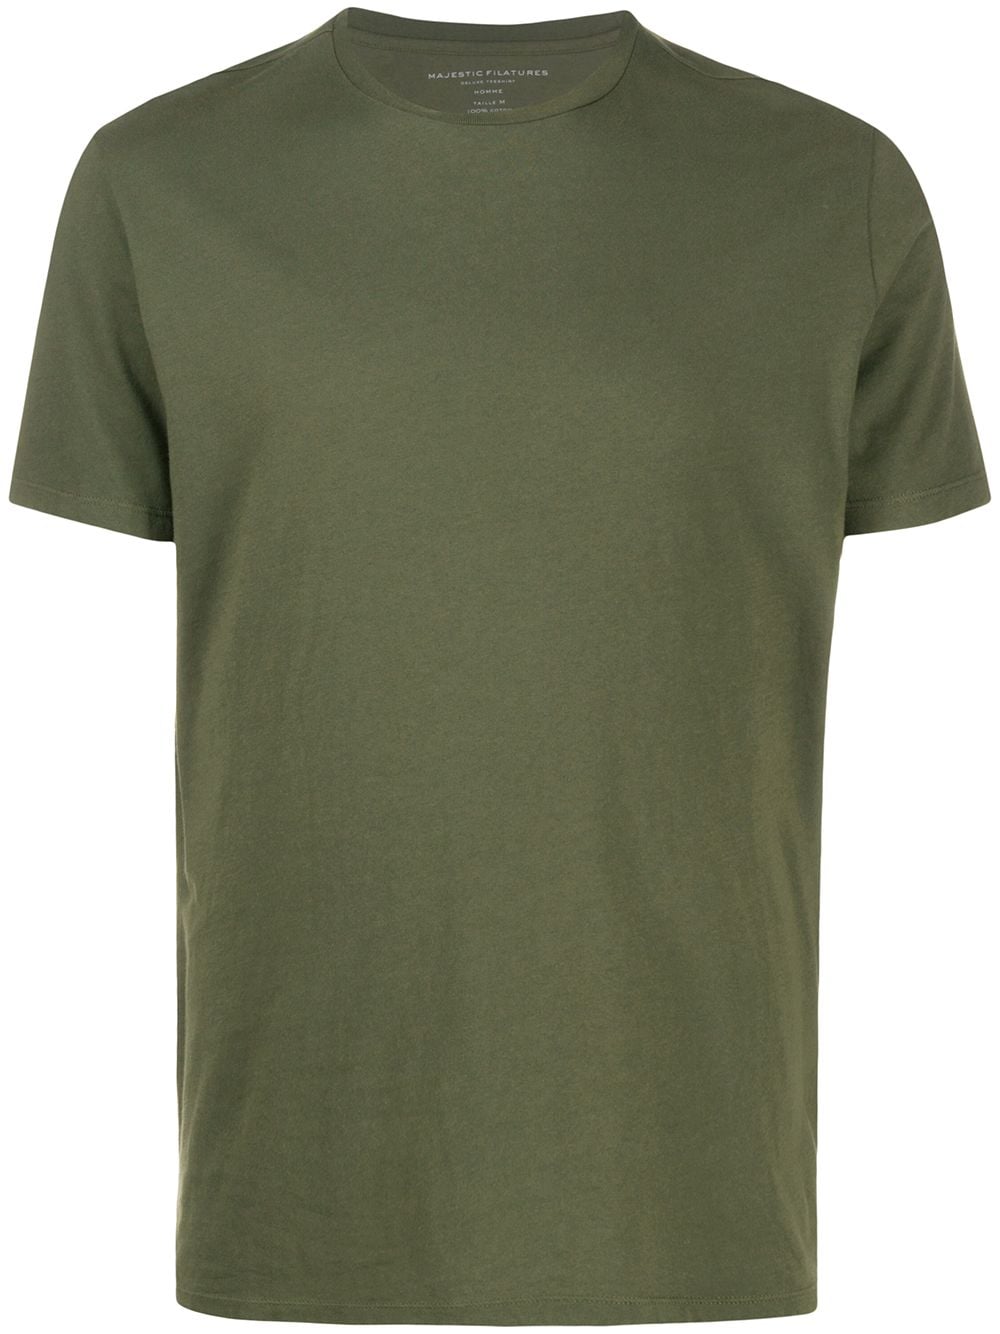 Khaki T-Shirt Coordinate Special! Introducing men's outfits and items ...